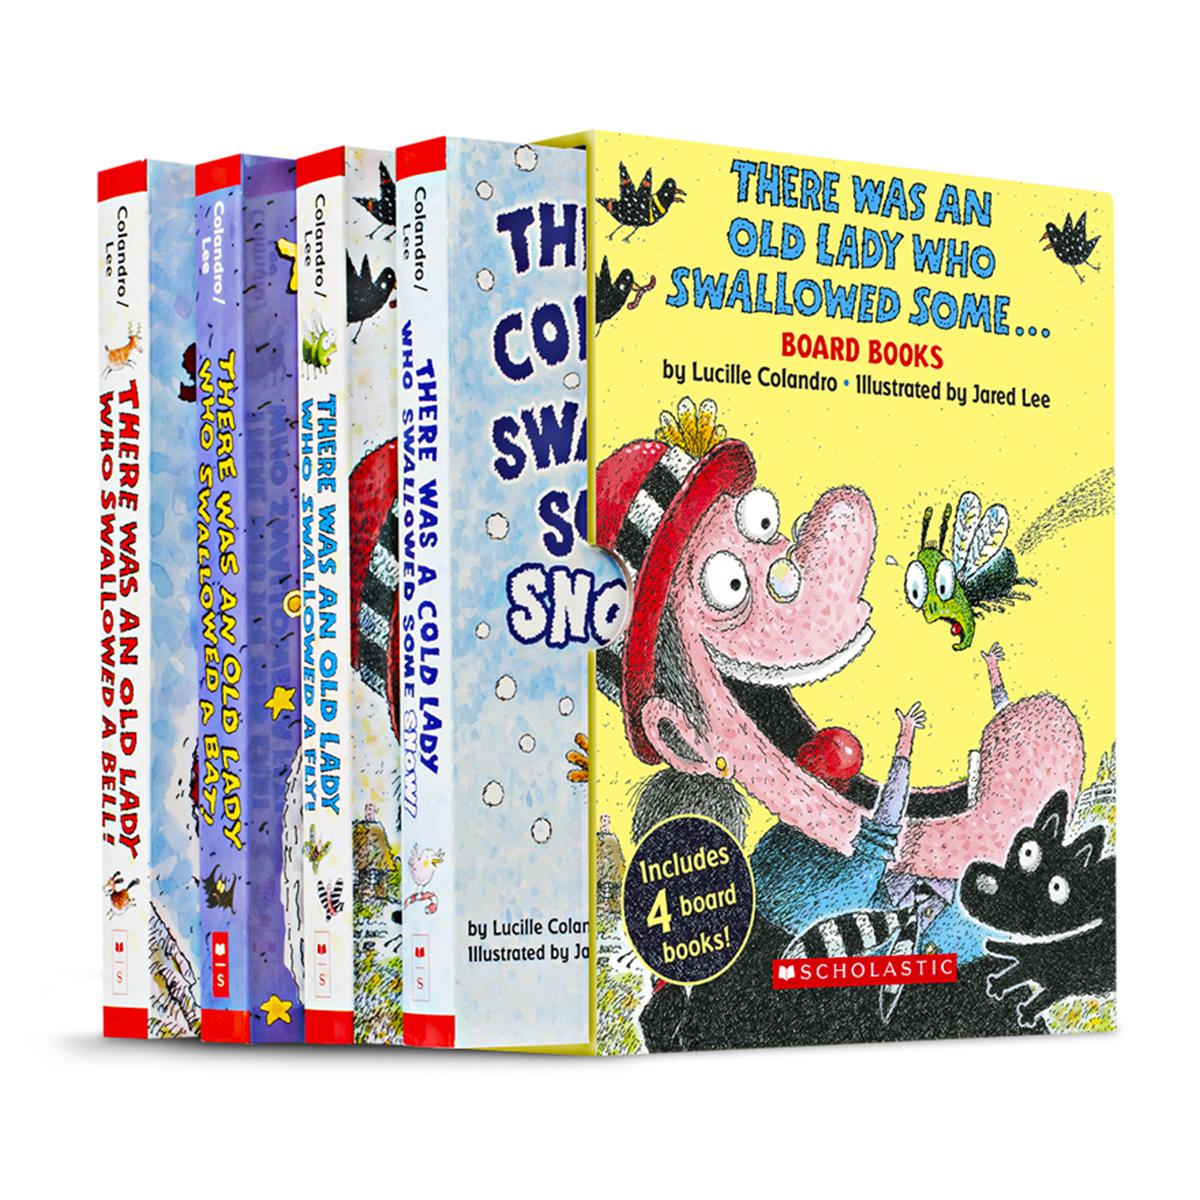  There Was an Old Lady Who Swallowed Some... Board Books Boxed Set 